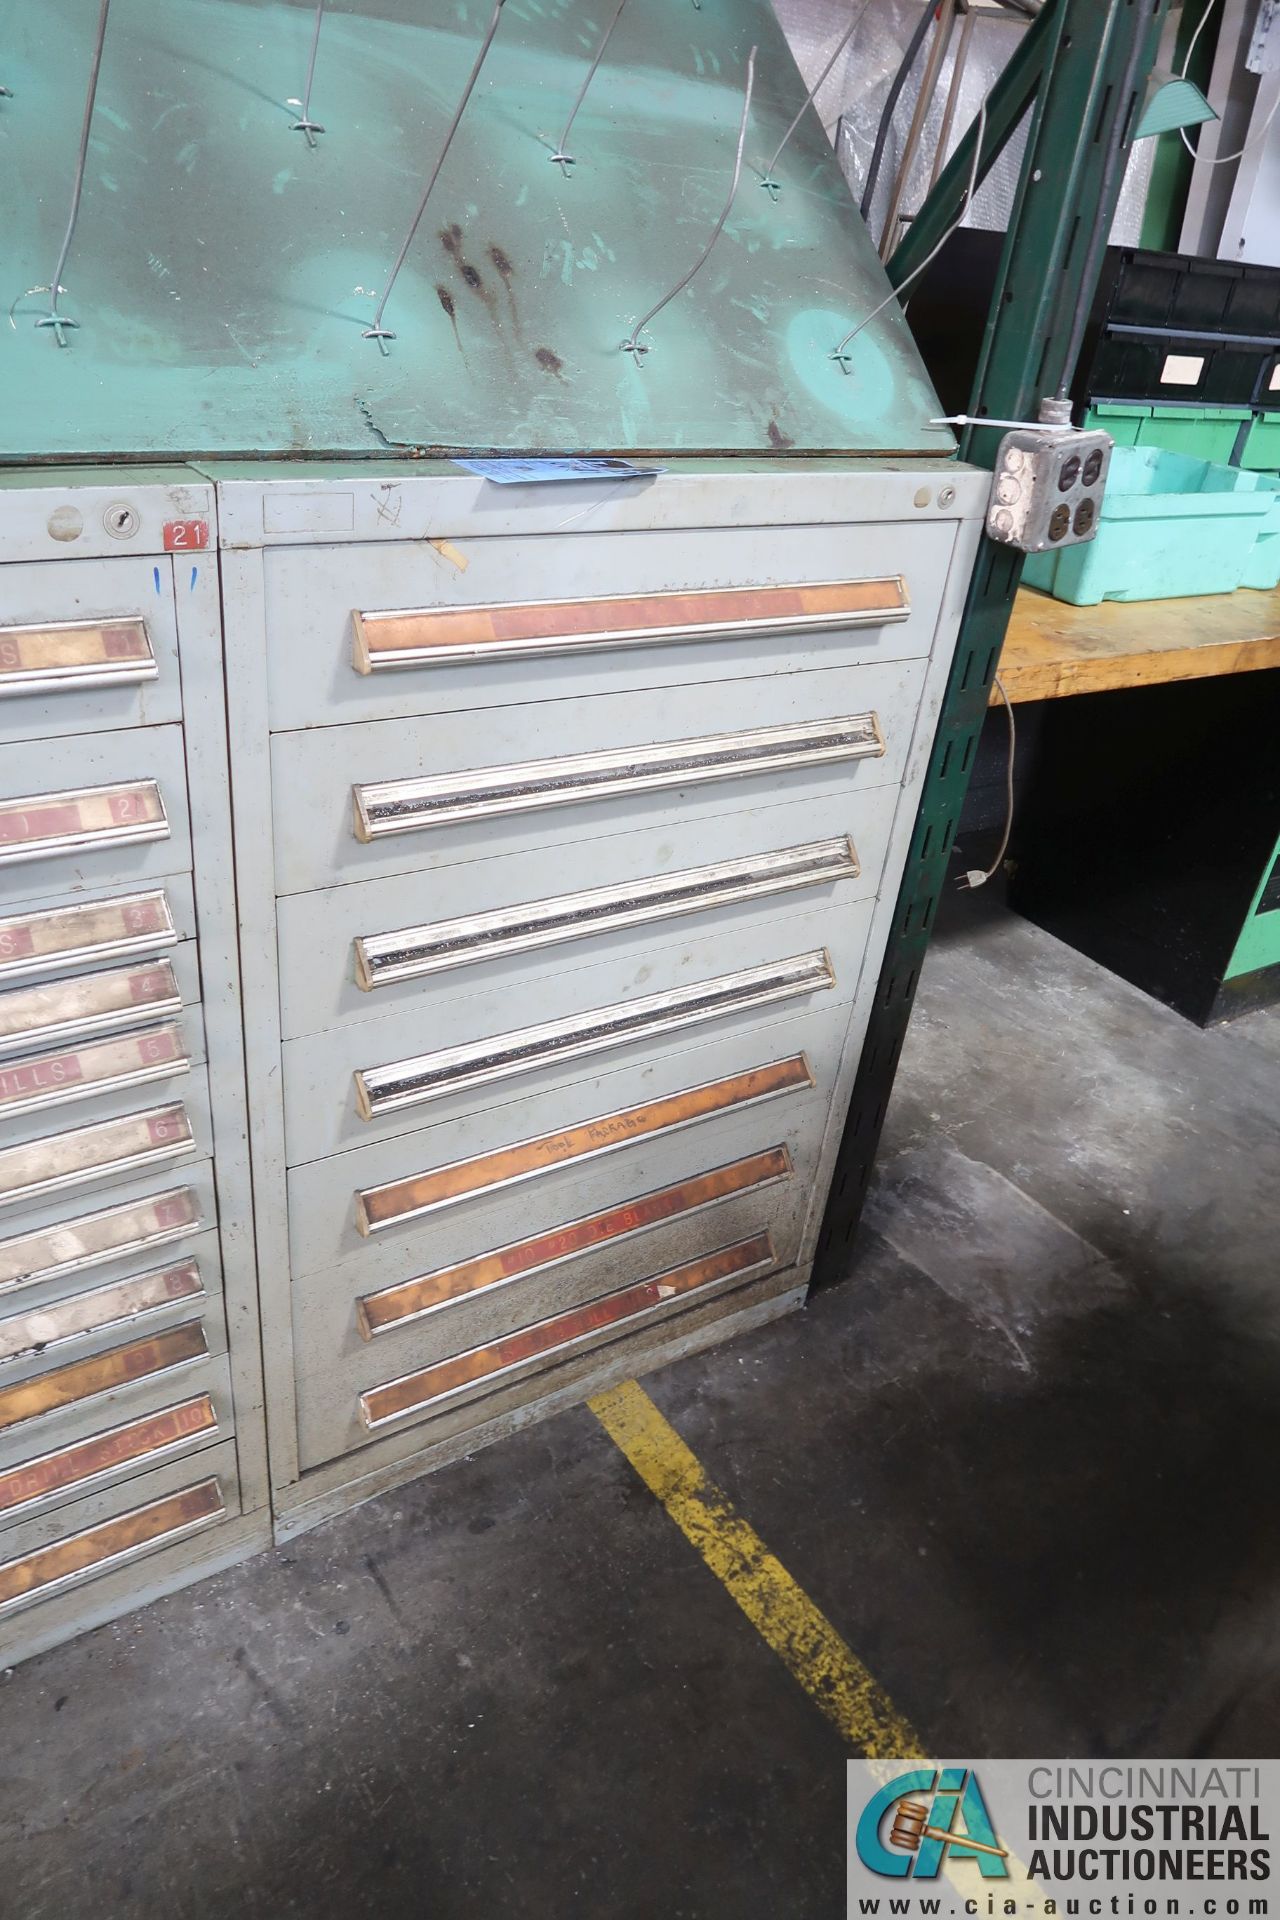 7-DRAWER CABINET WITH MAINTENANCE ITEMS - BEARINGS, SPRINGS AND OTHER TOOLING